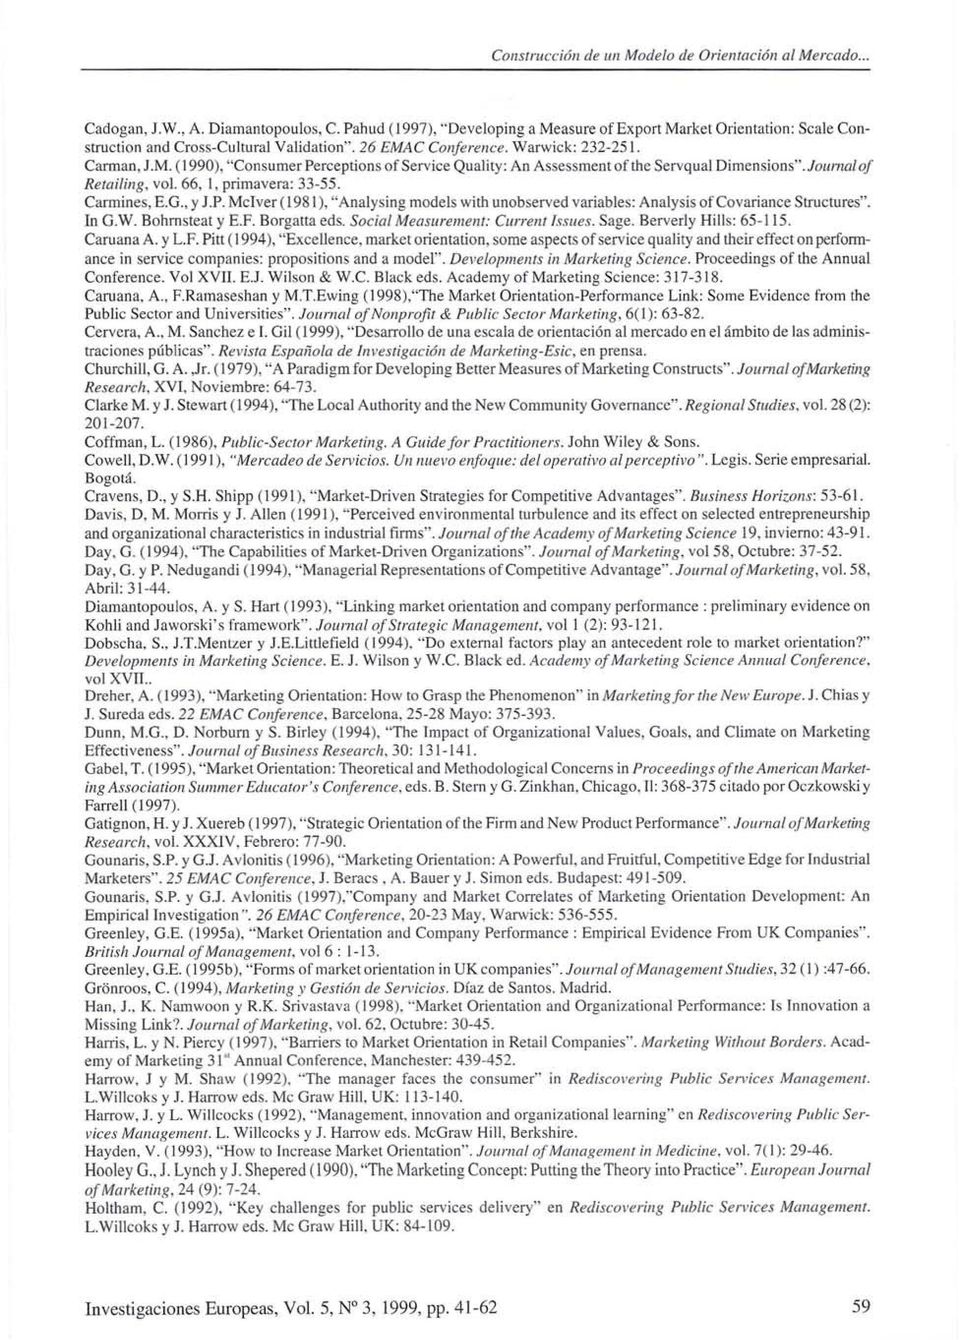 Journal of Retailing, vol. 66, 1, primavera: 33-55. Carmines, E.O., y J.P. McTver (1981), "Analysing models with unobserved variables: Analysis ofcovariance Structures". In O.W. Bohrnsteat y E.F.